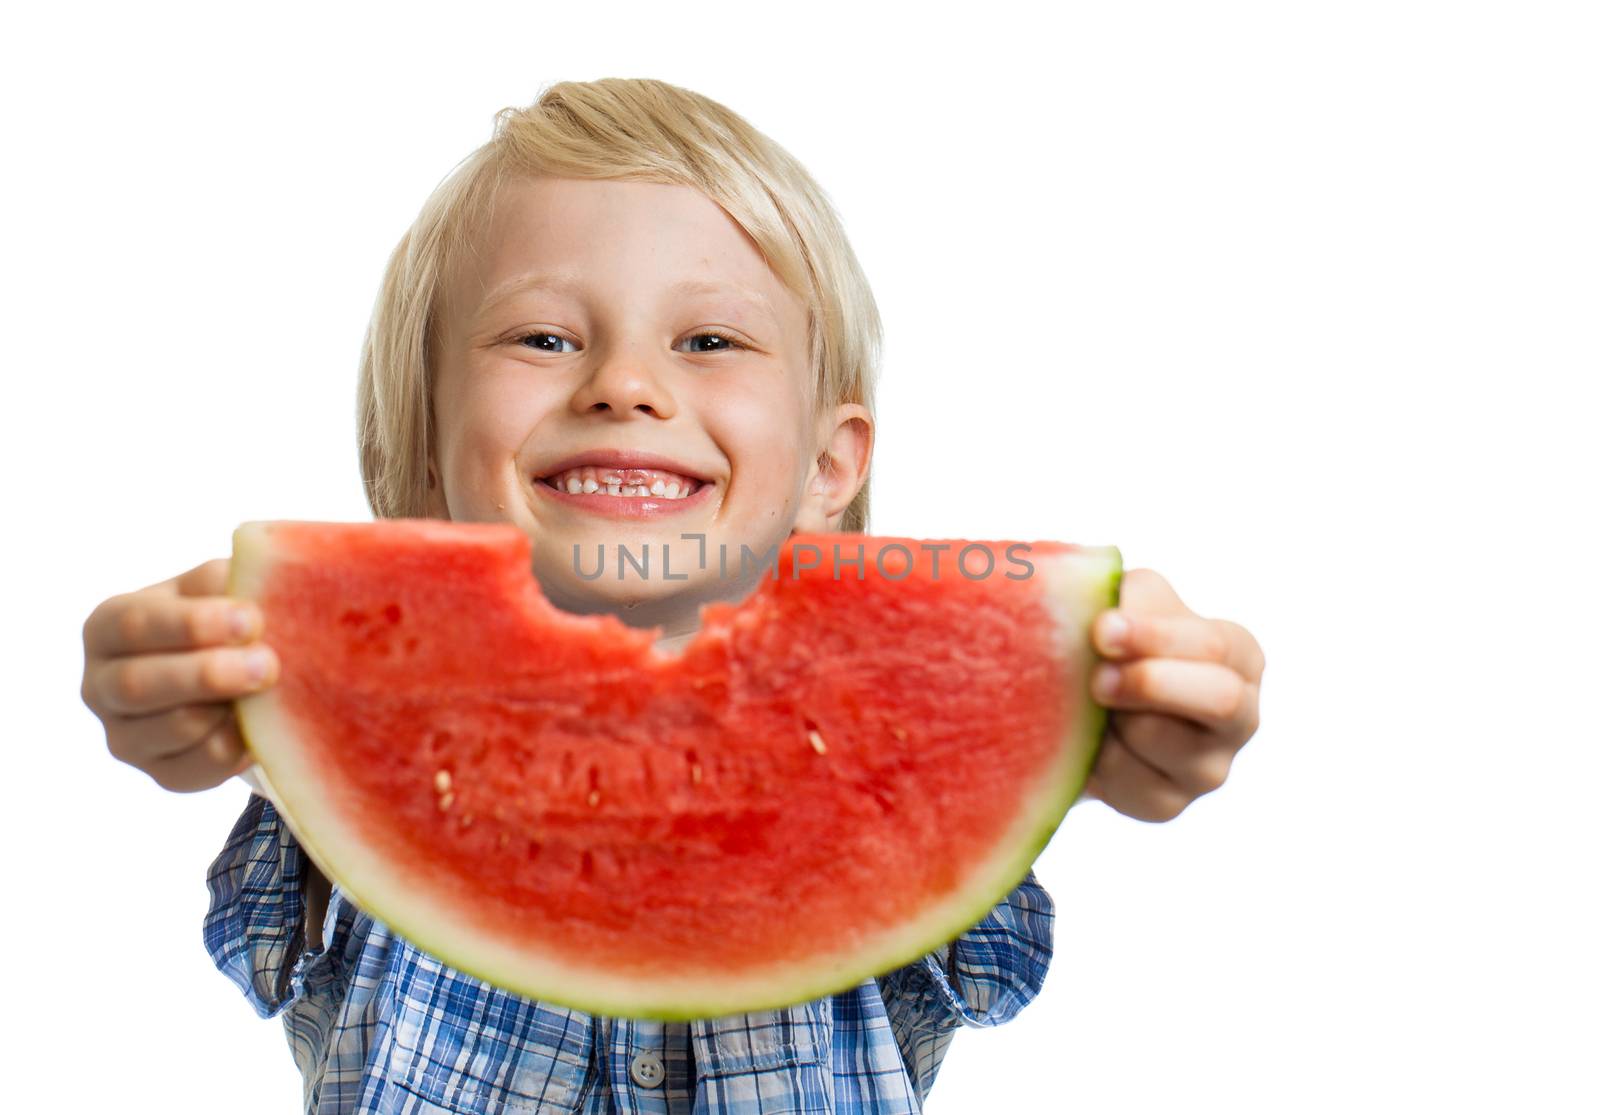 A cute smiling boy holding out and peeking through a bite in a slice water melon. Isolated on white. 







Cute boy holding watermelon with bites taken out of it